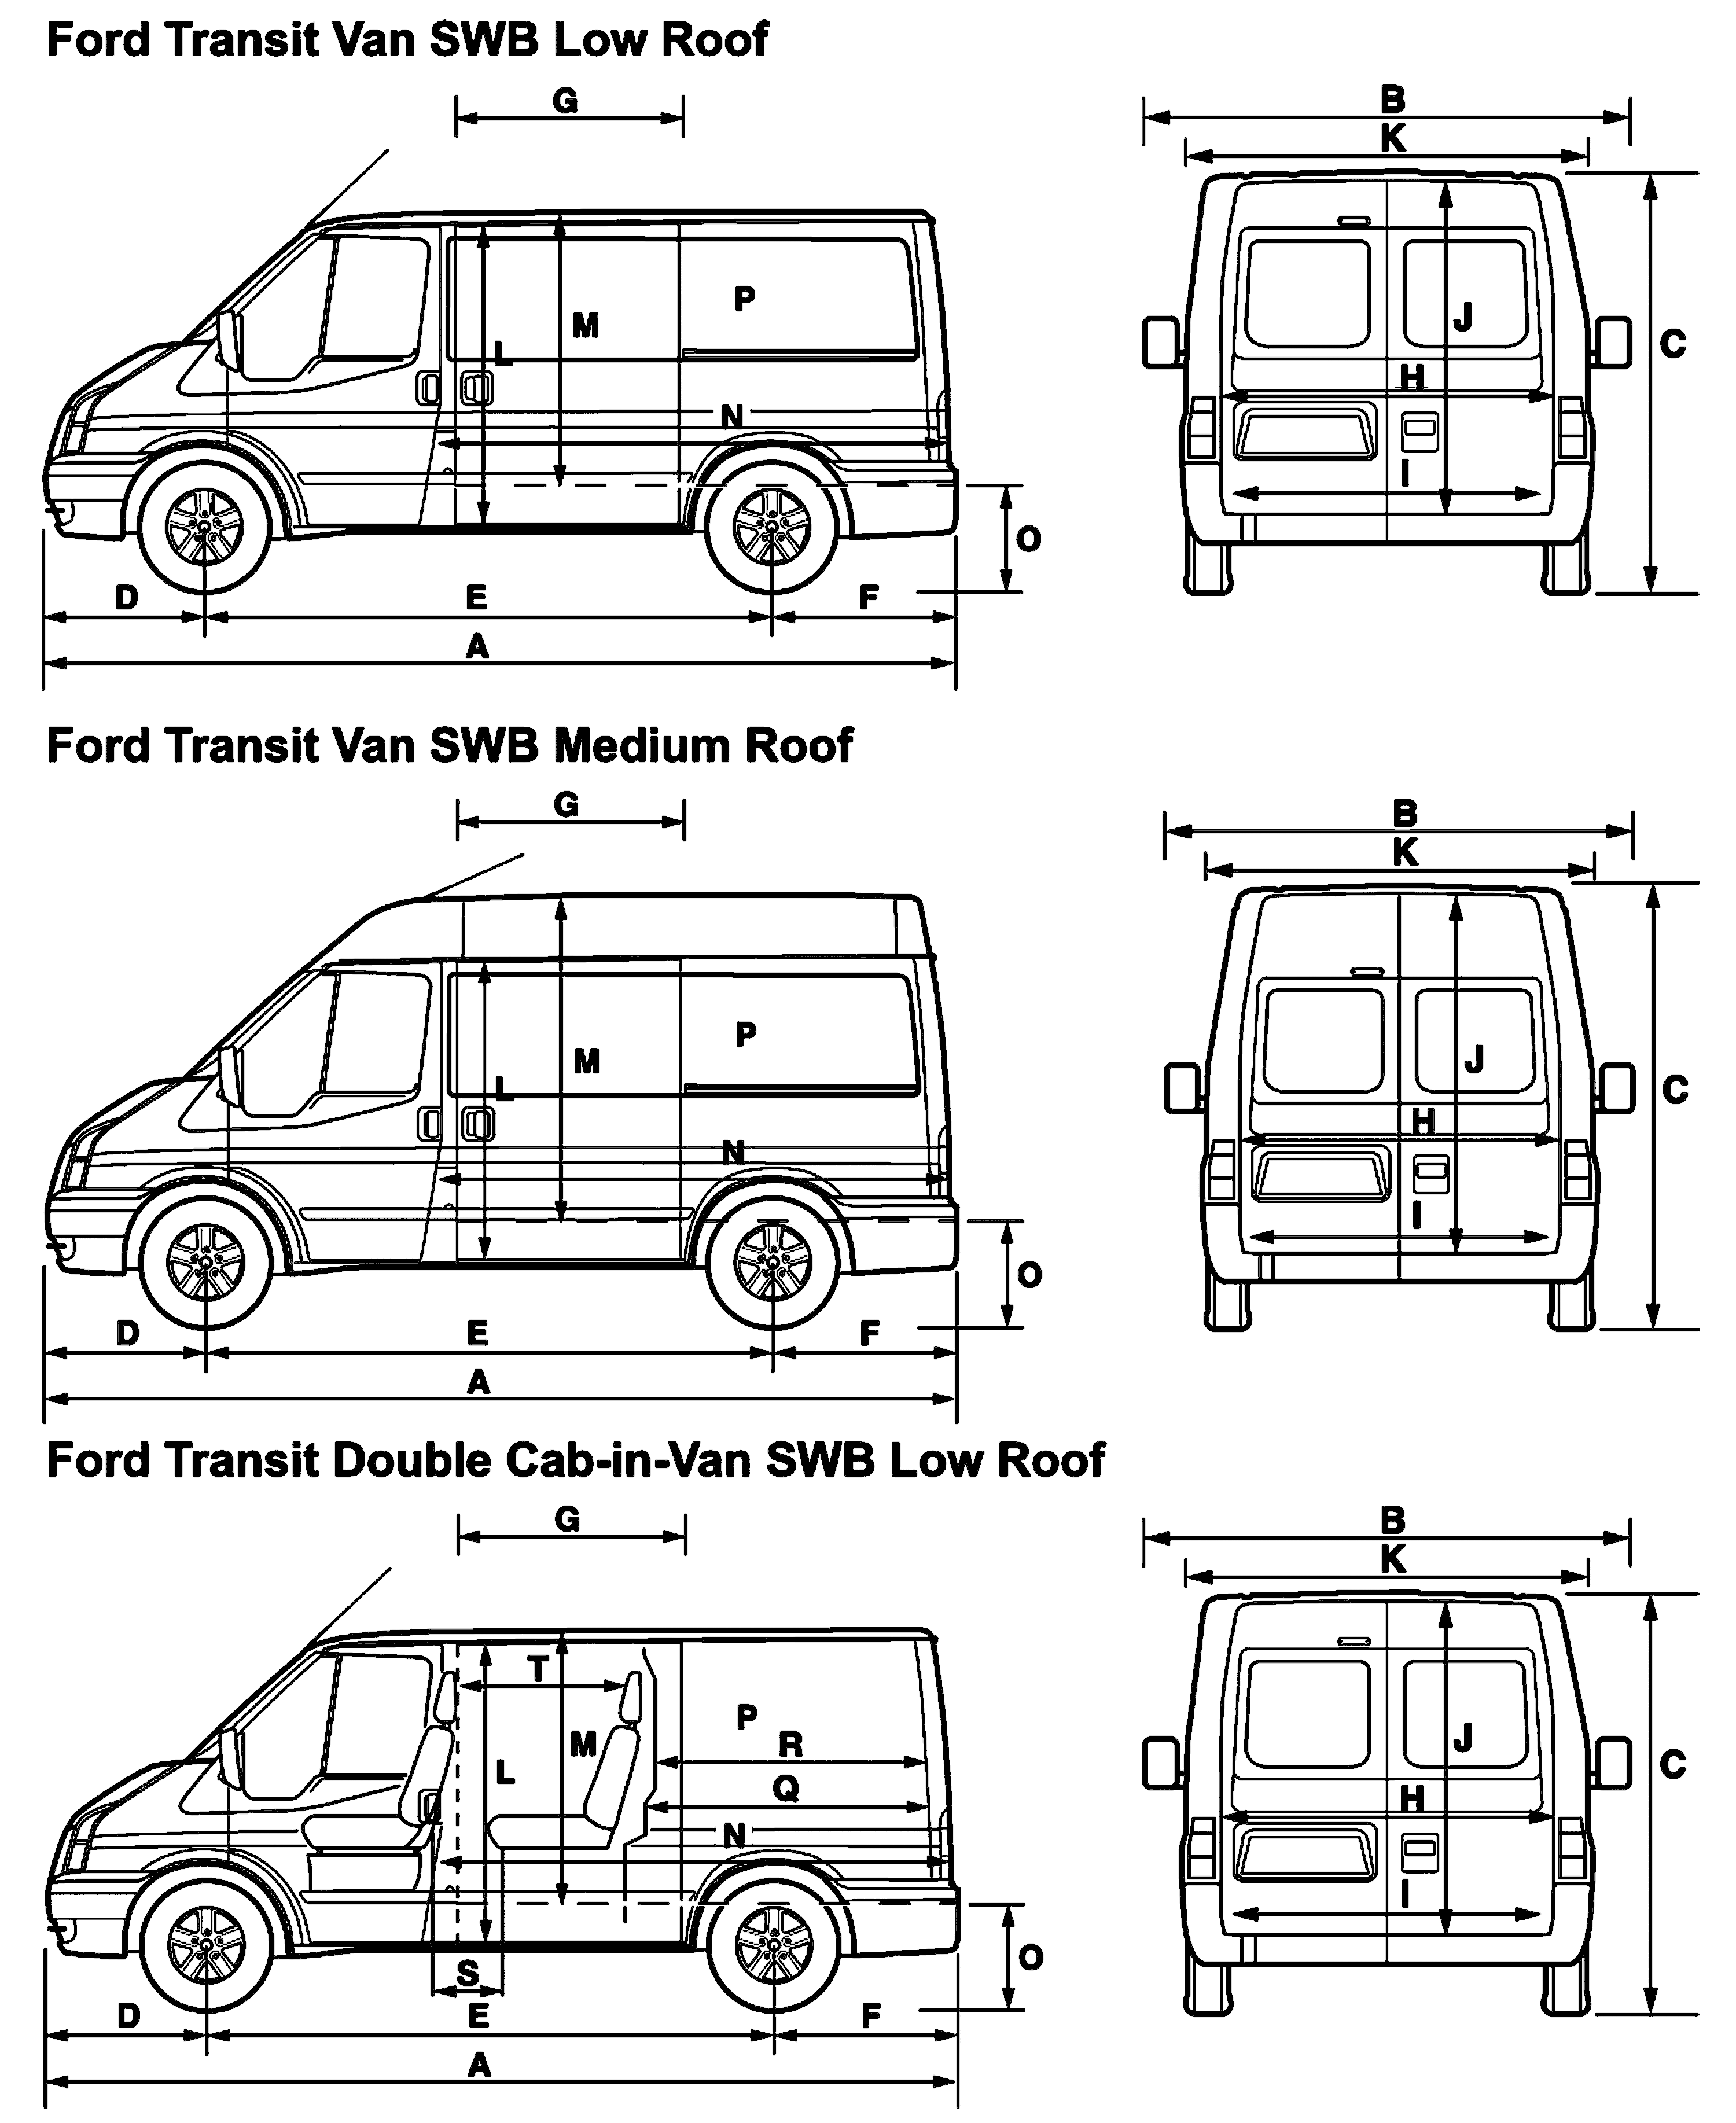 Templates - Cars - Ford - Ford Tourneo Connect LWB